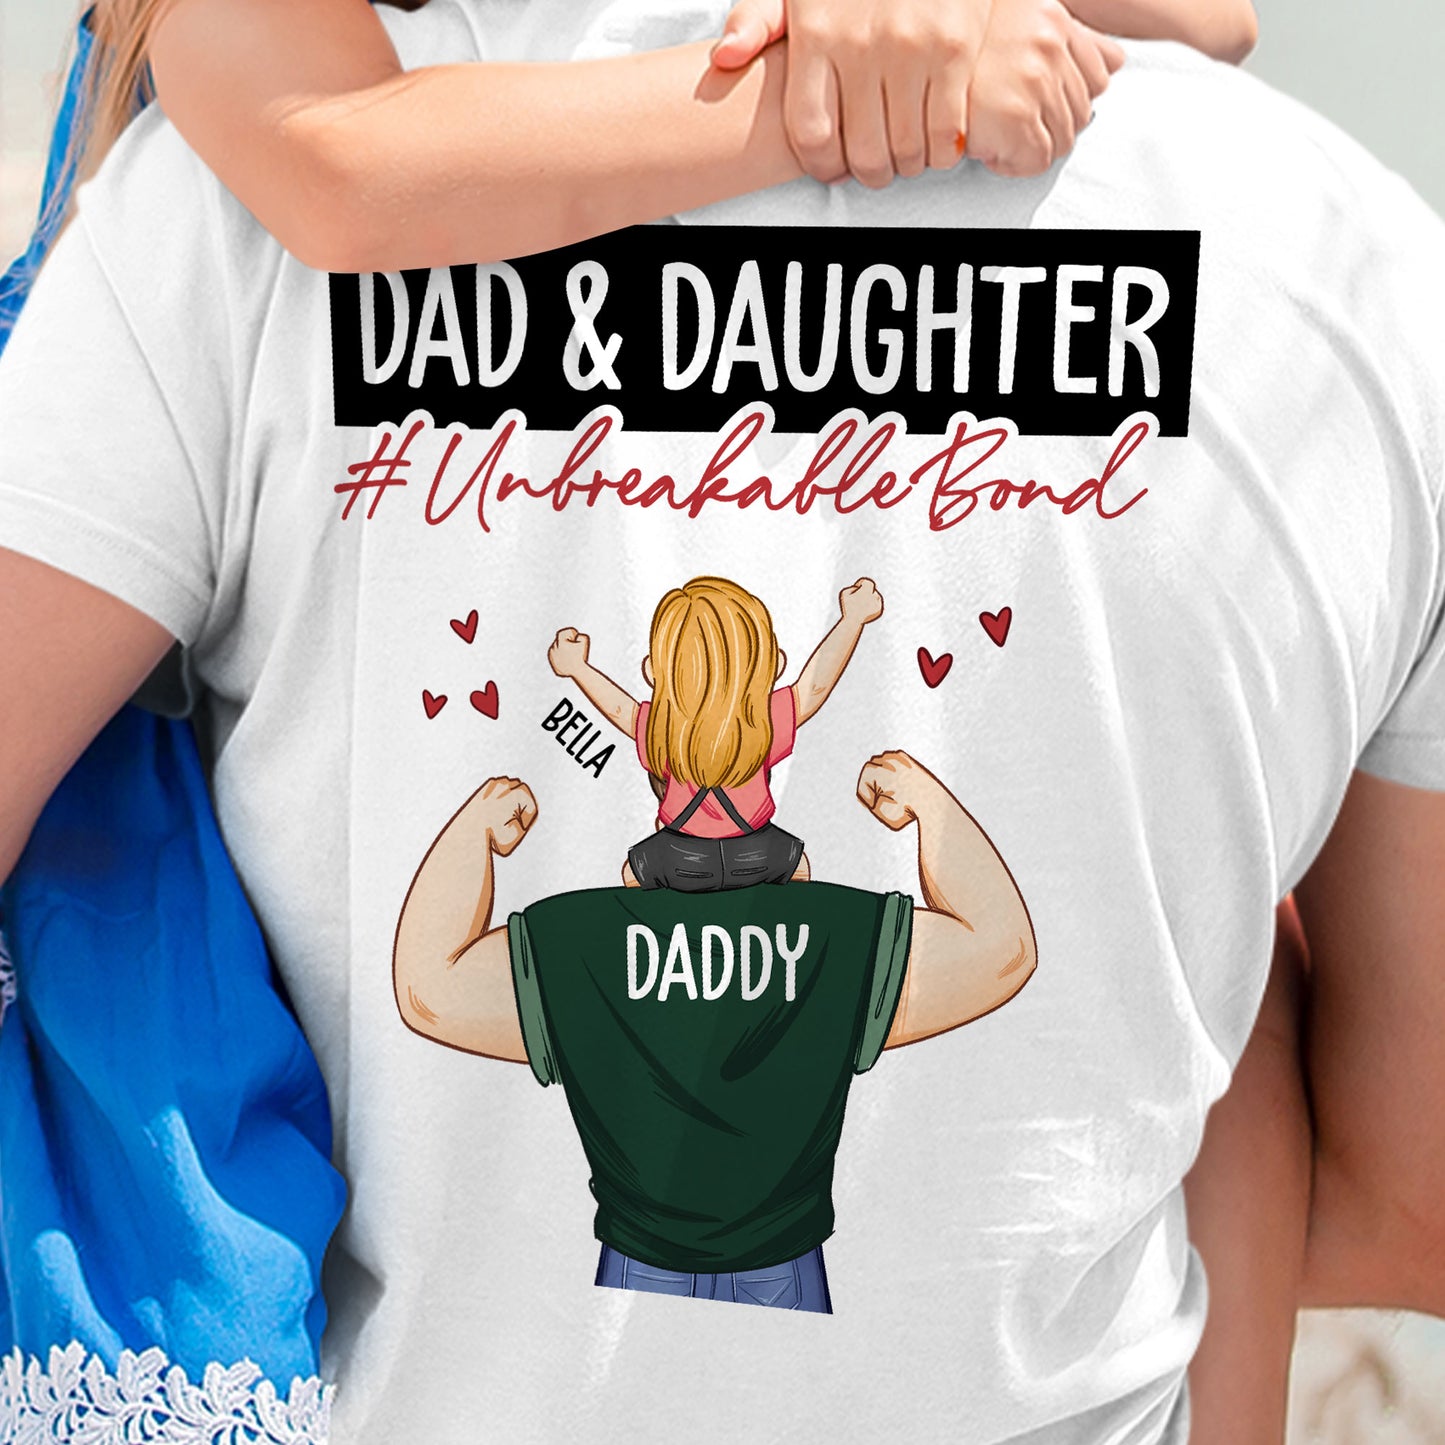 We Are An Unbreakable Bond - Personalized Back Printed Shirt